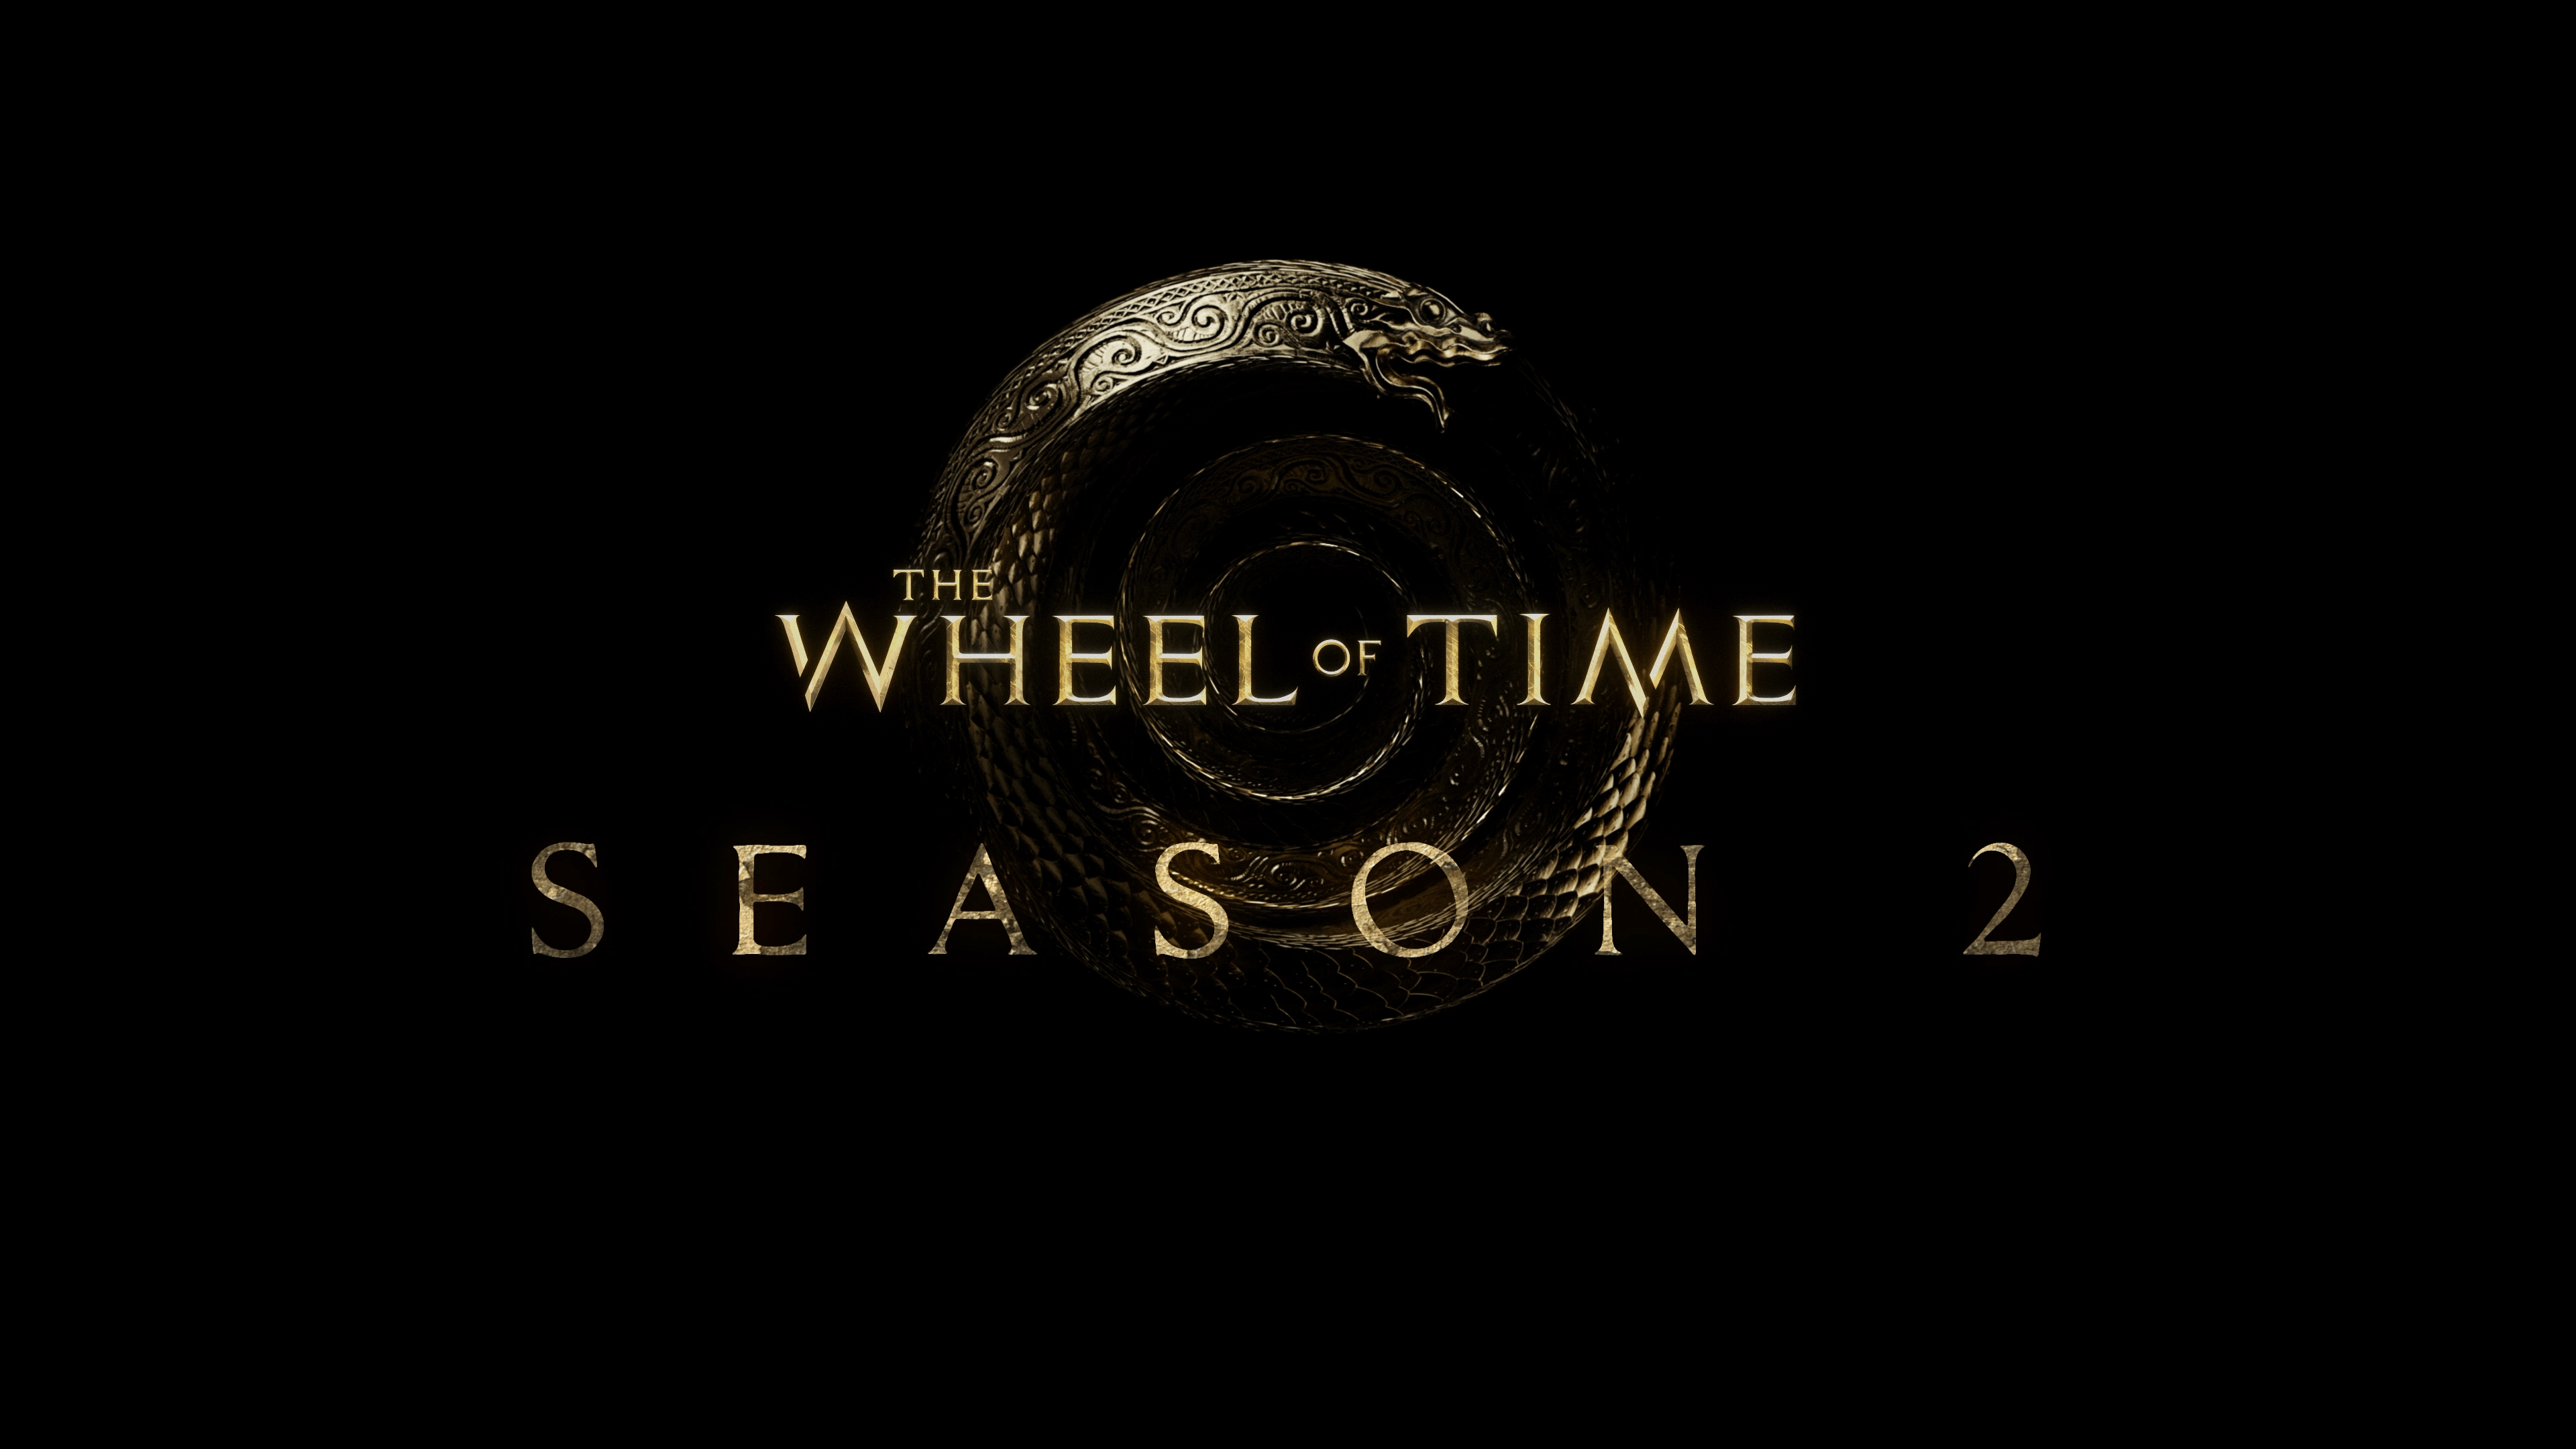 The Wheel Turns for Another Season— Prime Video Greenlights Third Season of the Hit Fantasy Series The Wheel of Time, From Amazon Studios and Sony Pictures Television. #SDCC2022